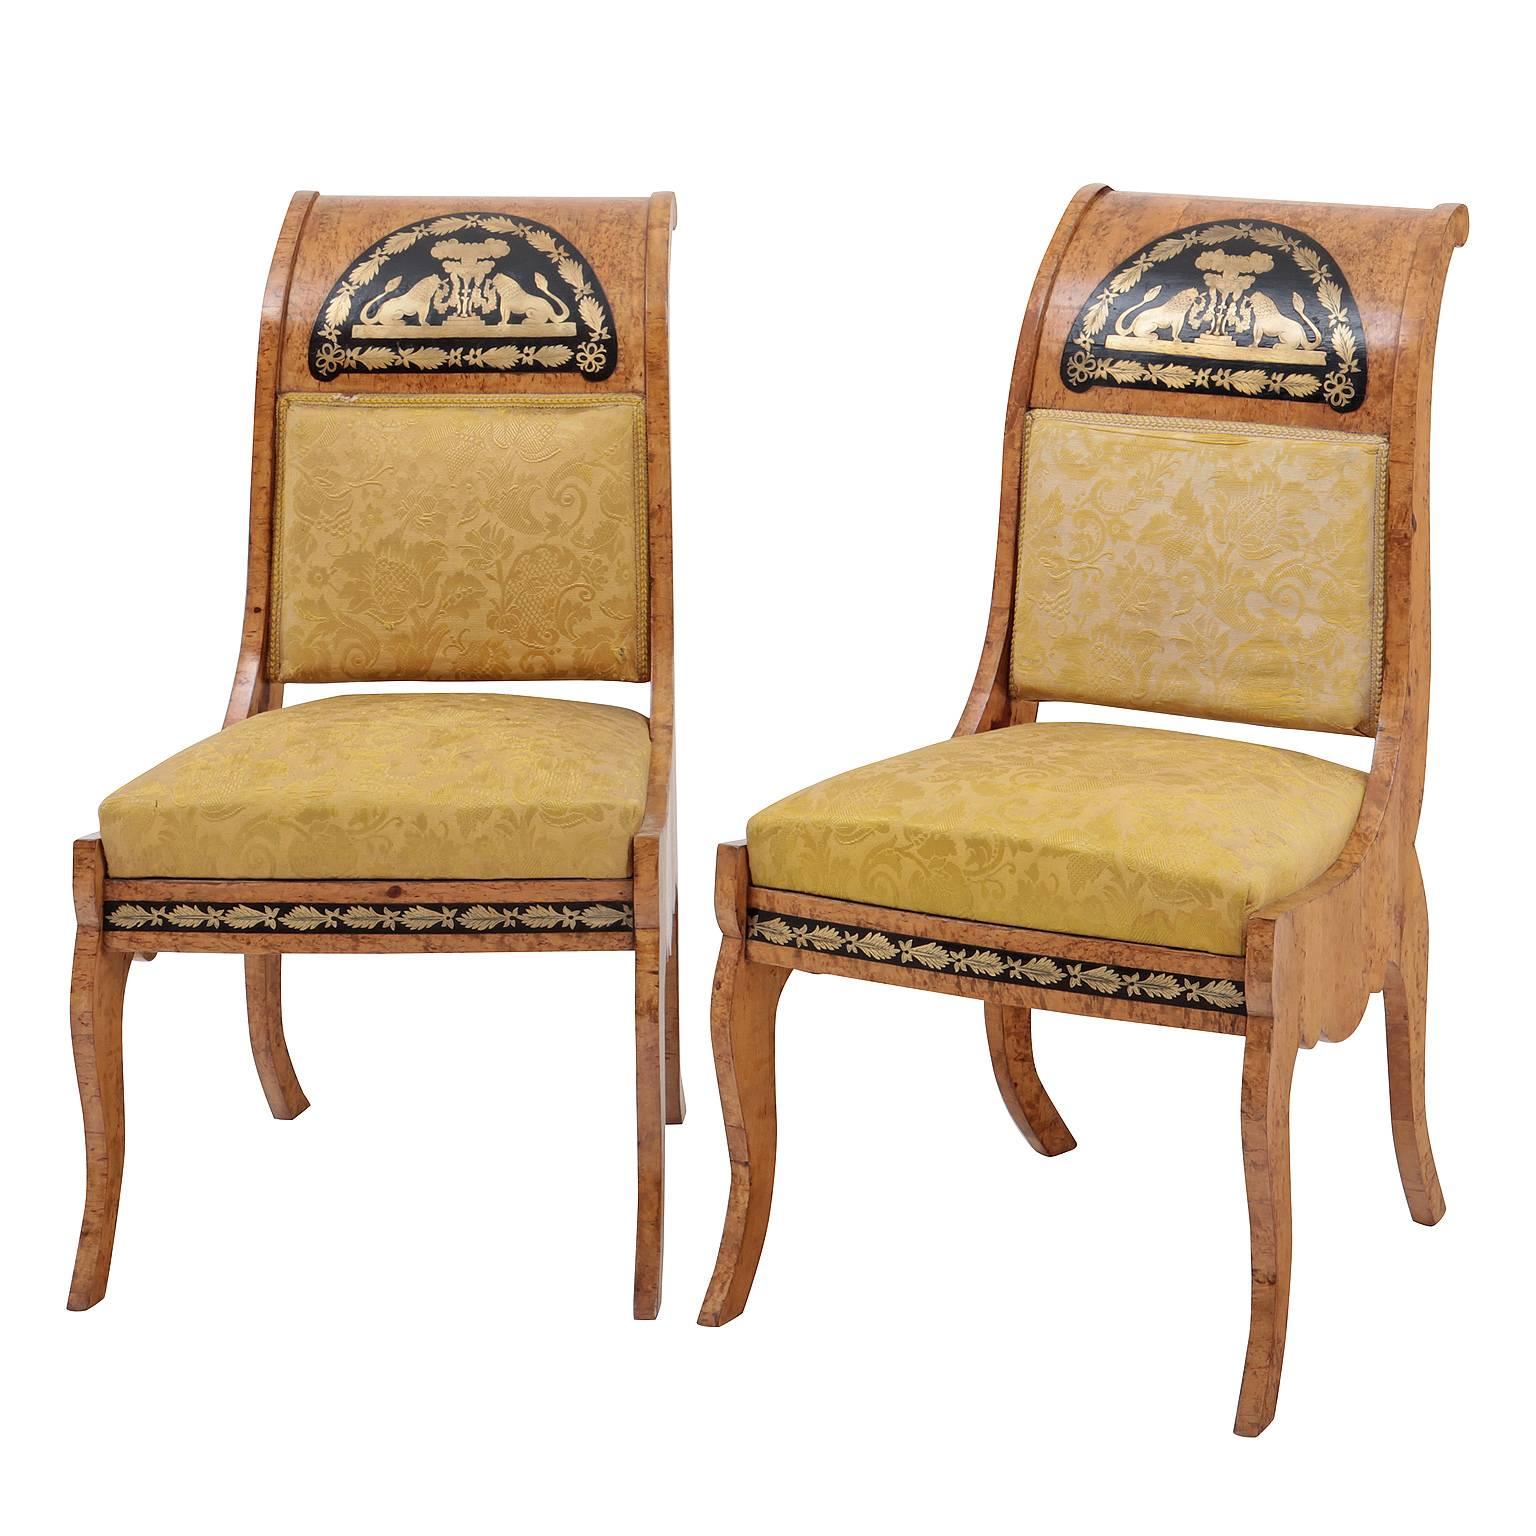 Pair of Empire Dining Chairs, Russia, circa 1850